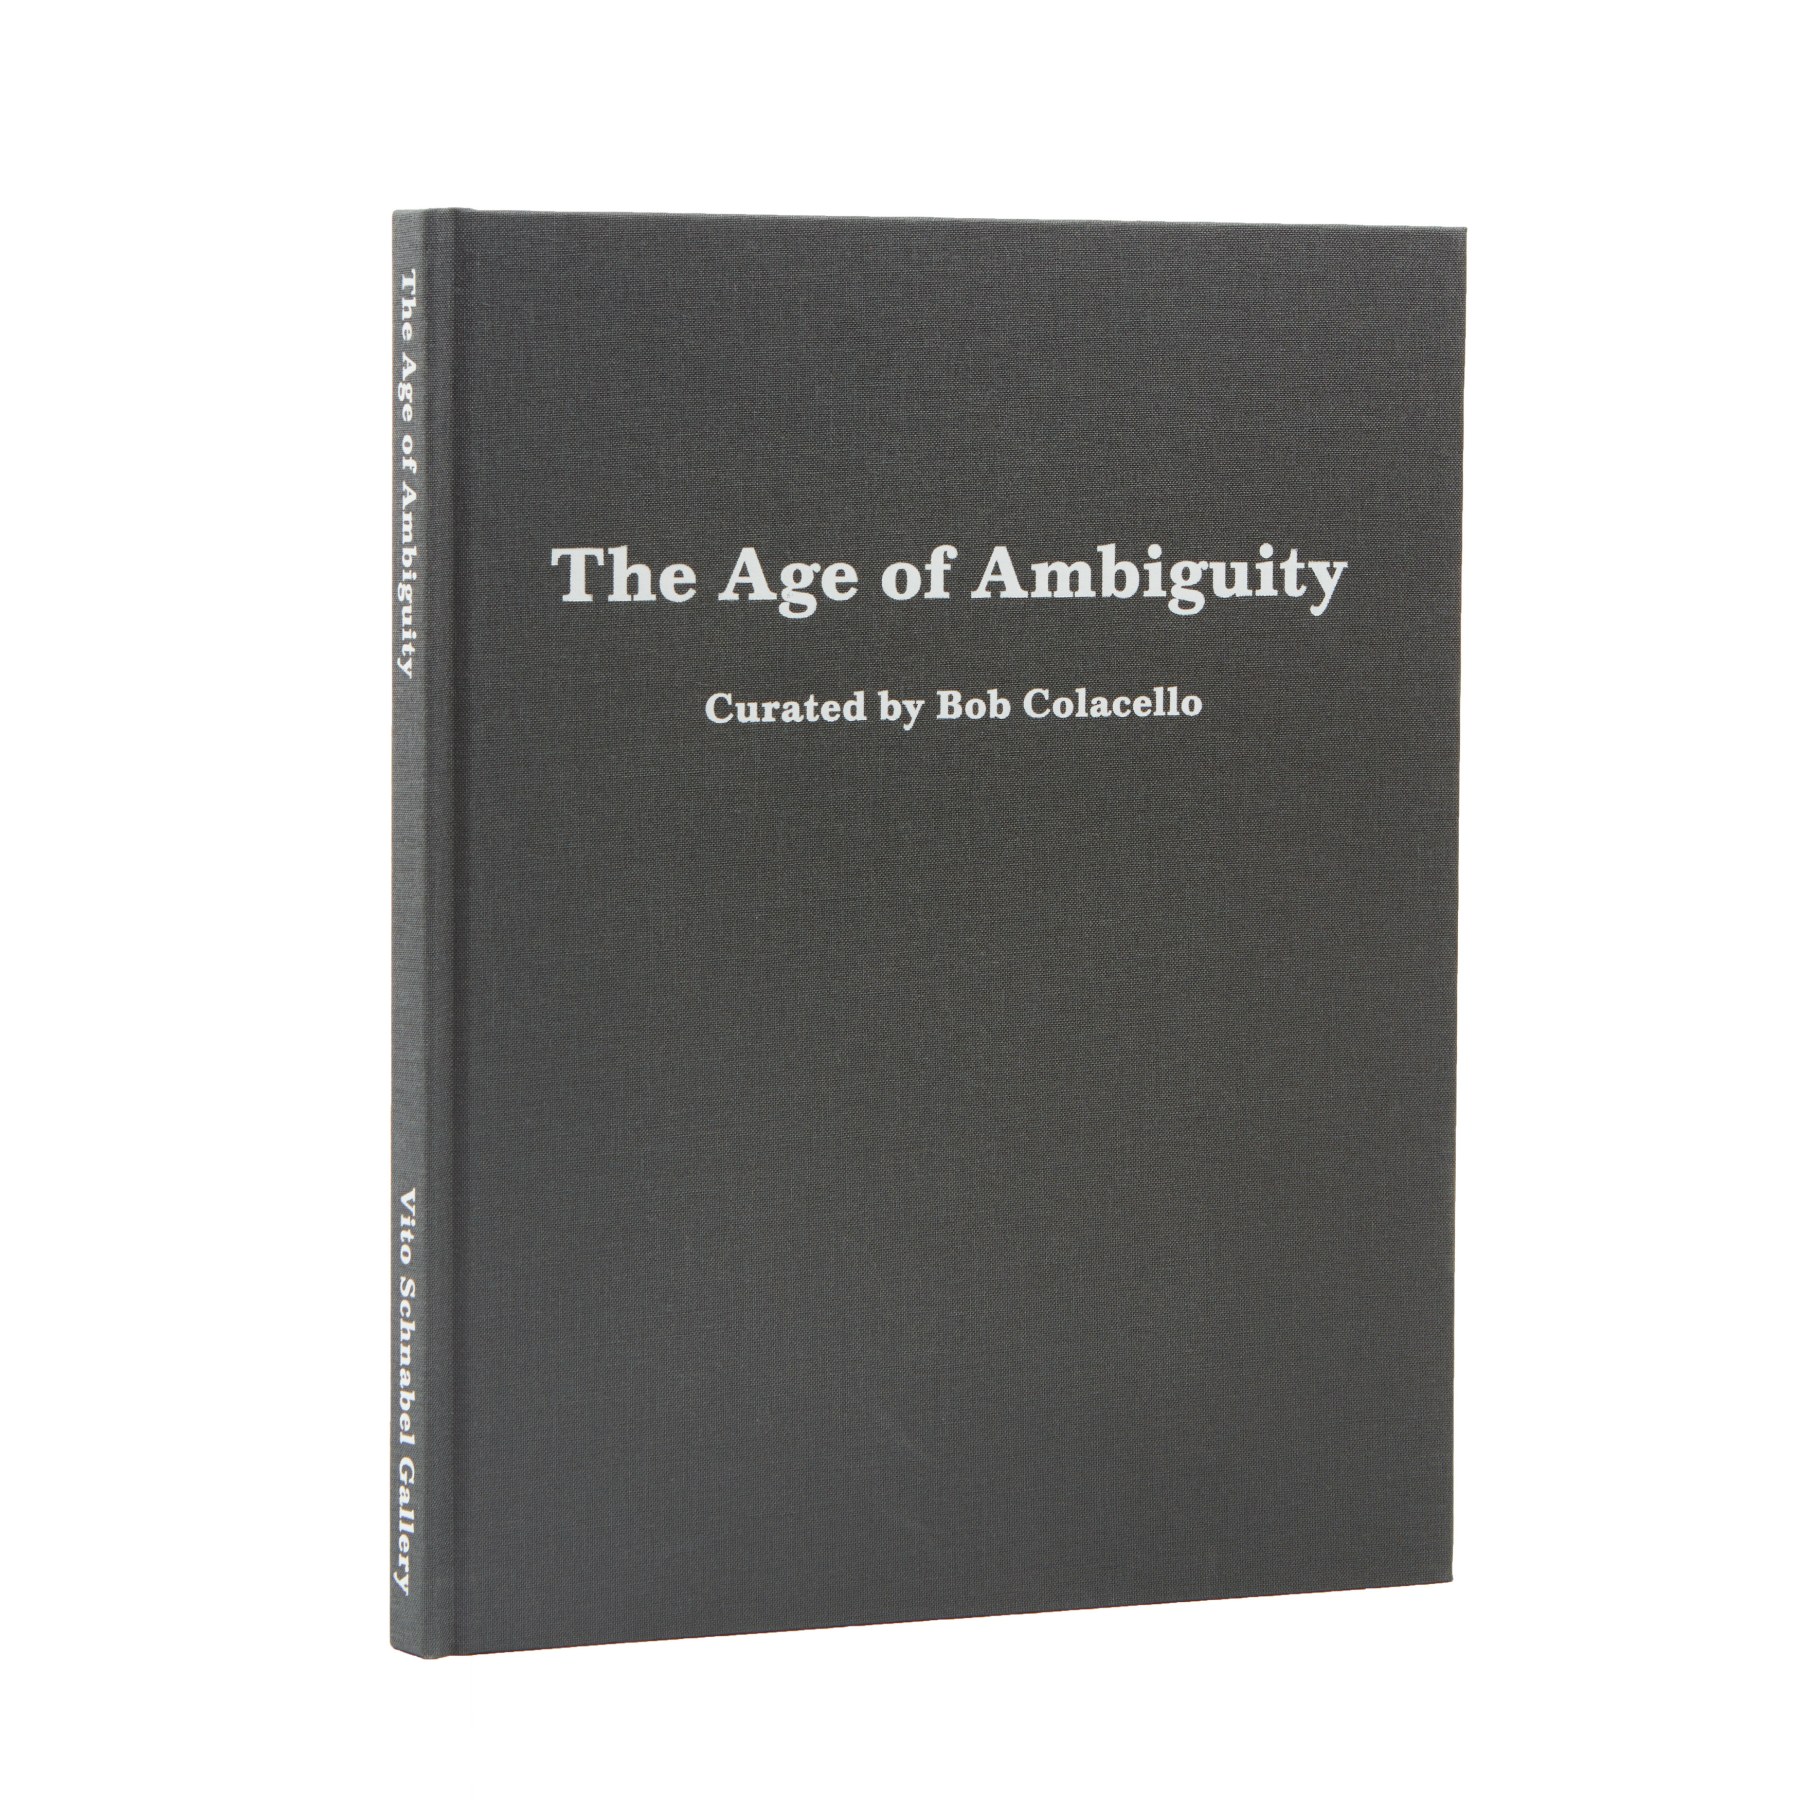 The Age of Ambiguity